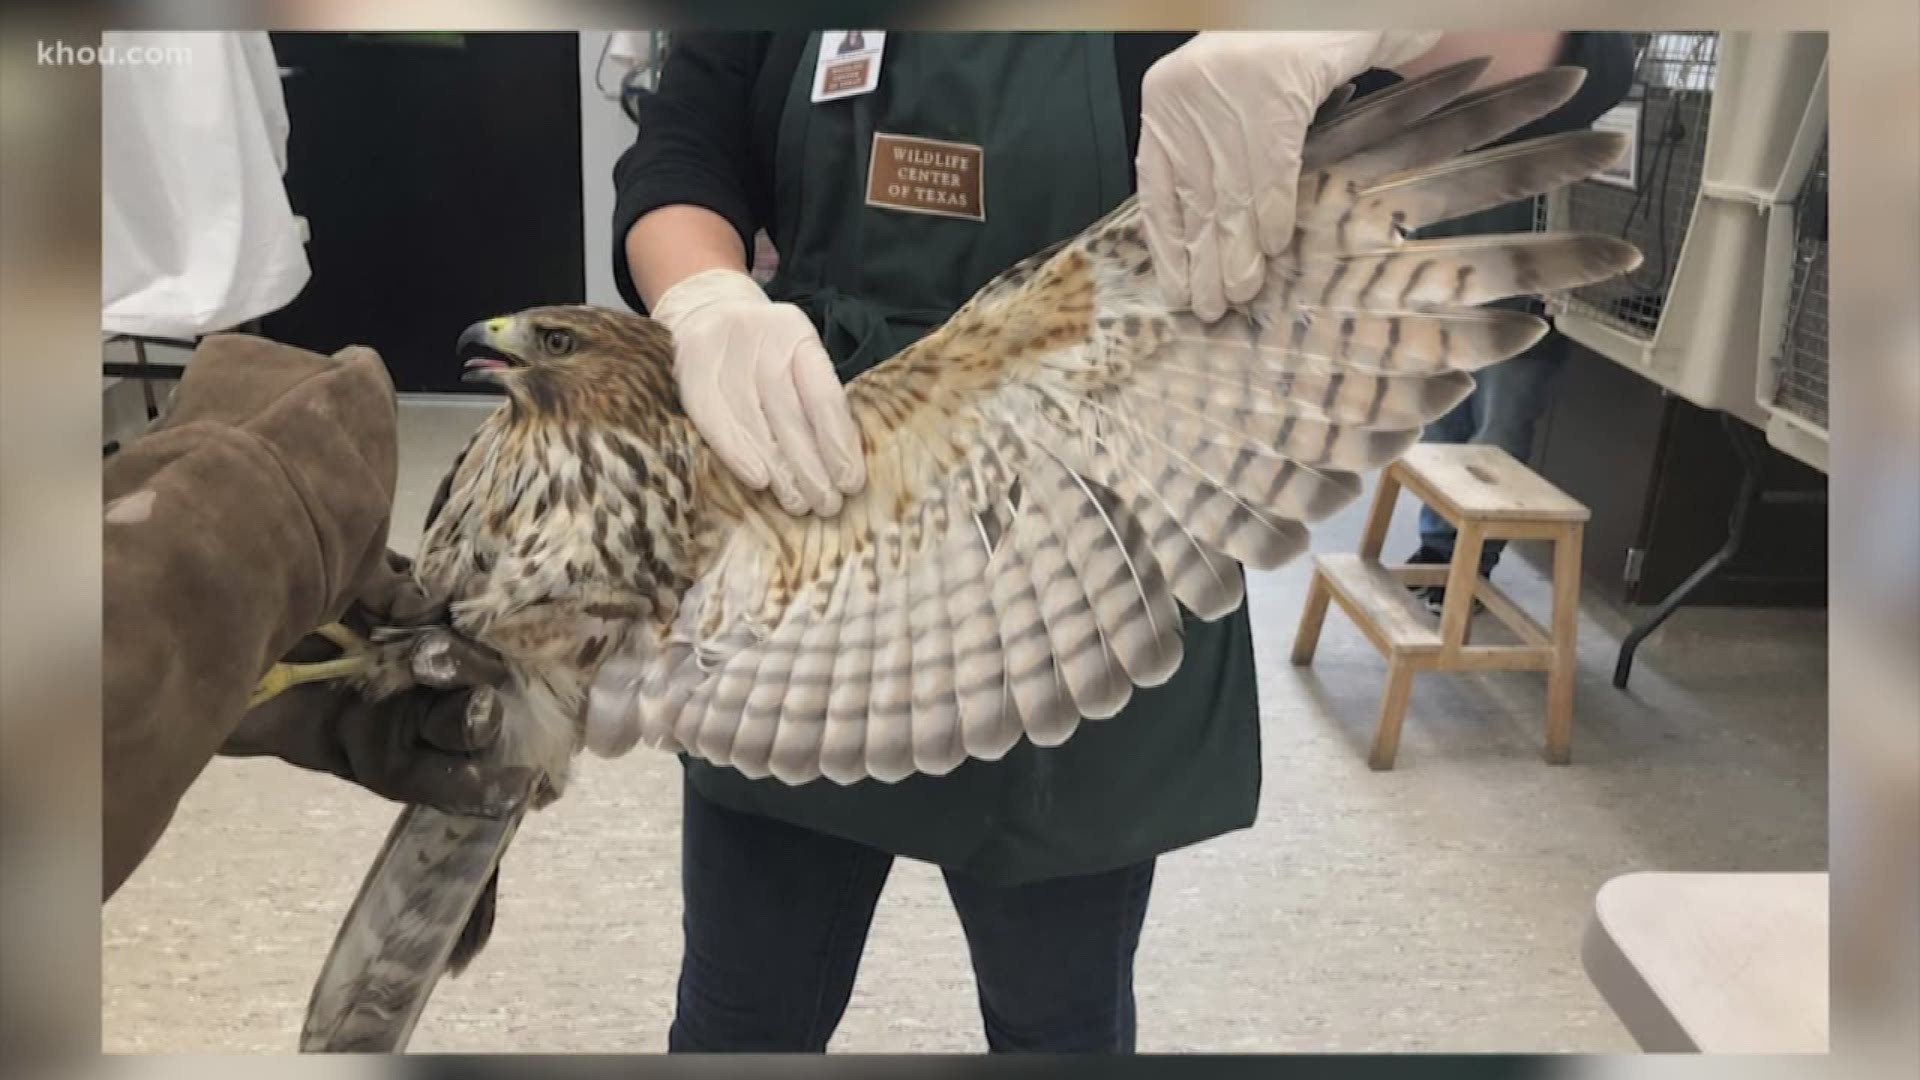 The Houston SPCA was able to help free the bird.